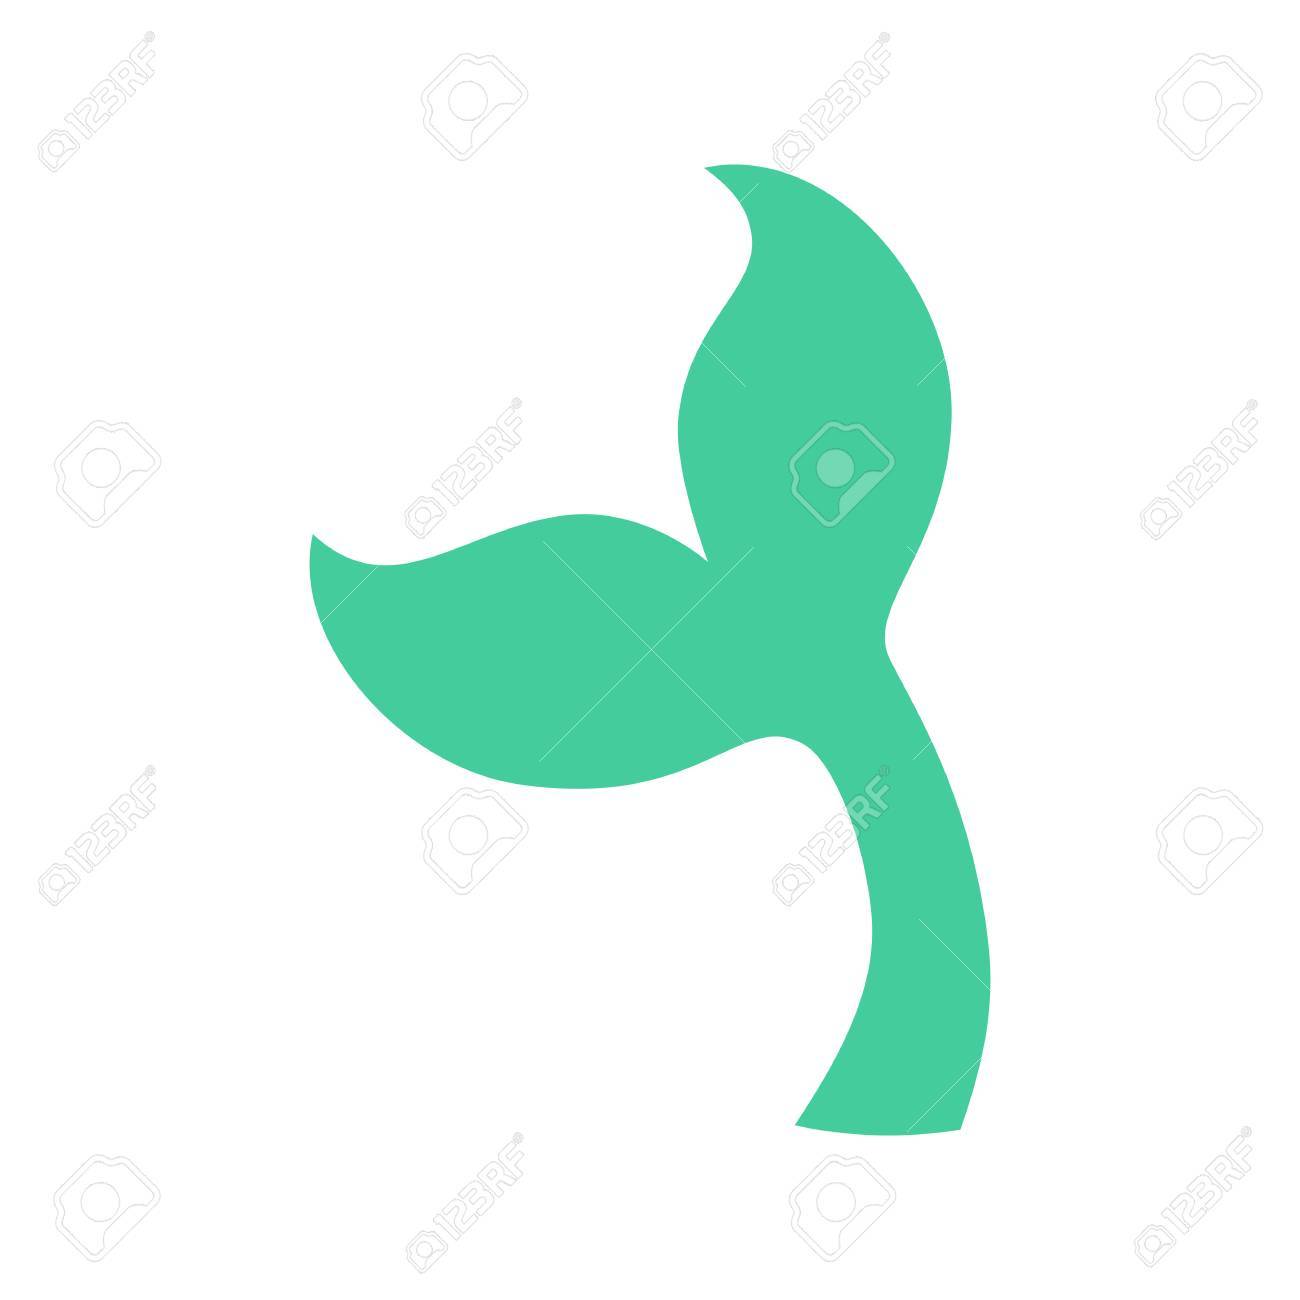 Mermaid tail silhouette of whale icon fish vector jpg